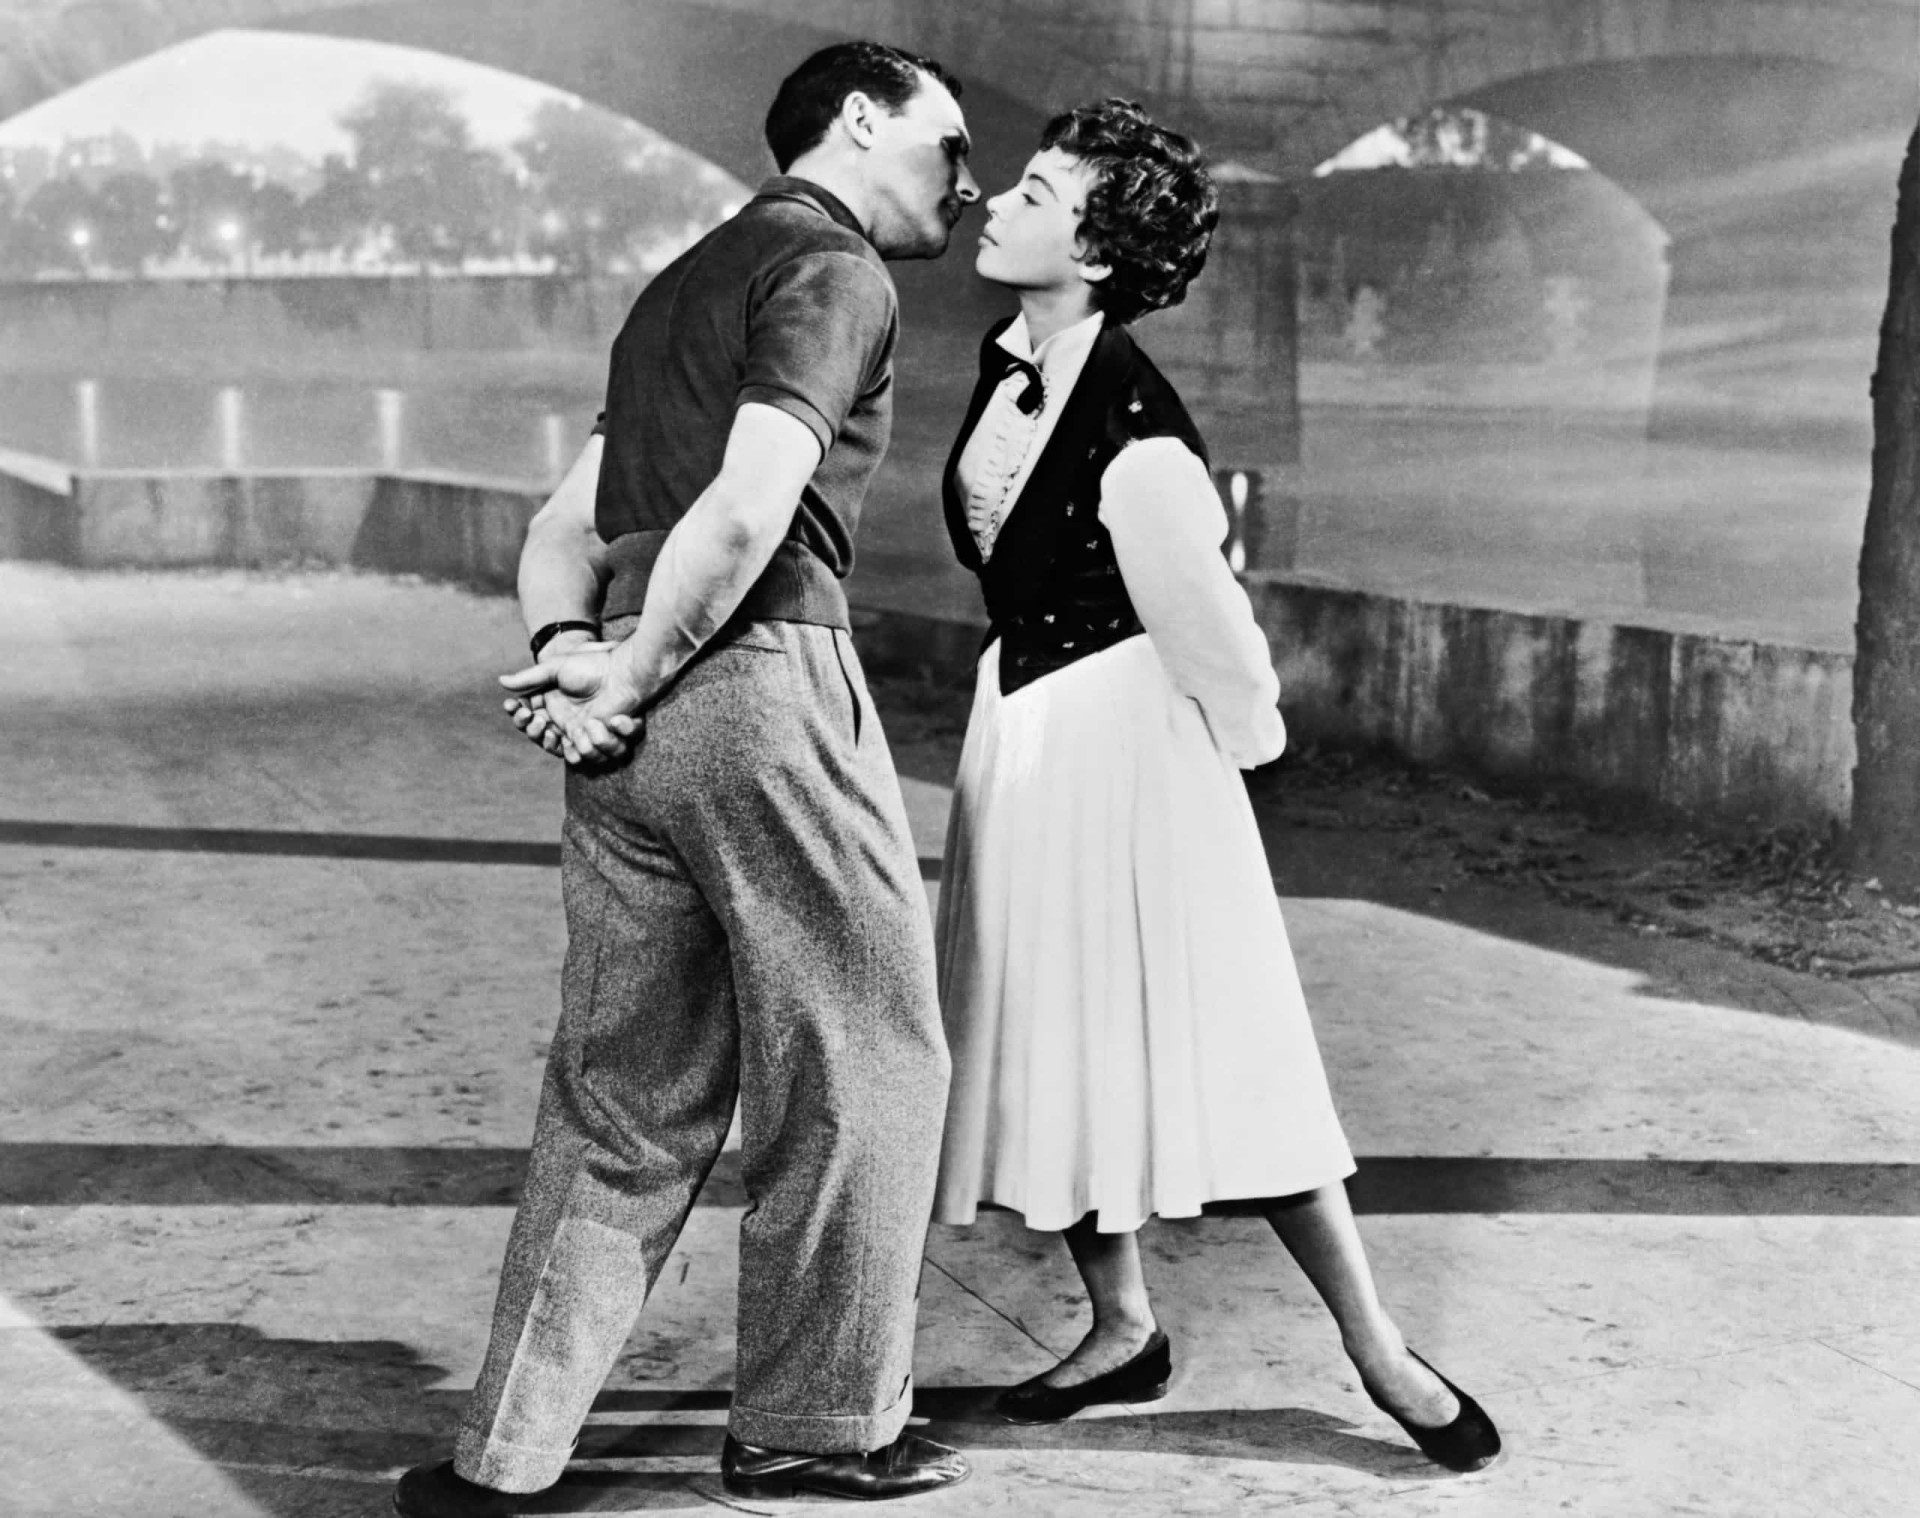 <p>The twinkle toes of Gene Kelly and Leslie Caron really shine in this film. Three friends go to Paris looking for work, but encounter major difficulties when two of them fall in love with the same girl. This movie will uplift you with its musical charm.</p><p>You may also like:<a href="https://www.starsinsider.com/n/454714?utm_source=msn.com&utm_medium=display&utm_campaign=referral_description&utm_content=458166v3en-us"> Rich list celebrities who had ordinary jobs</a></p>